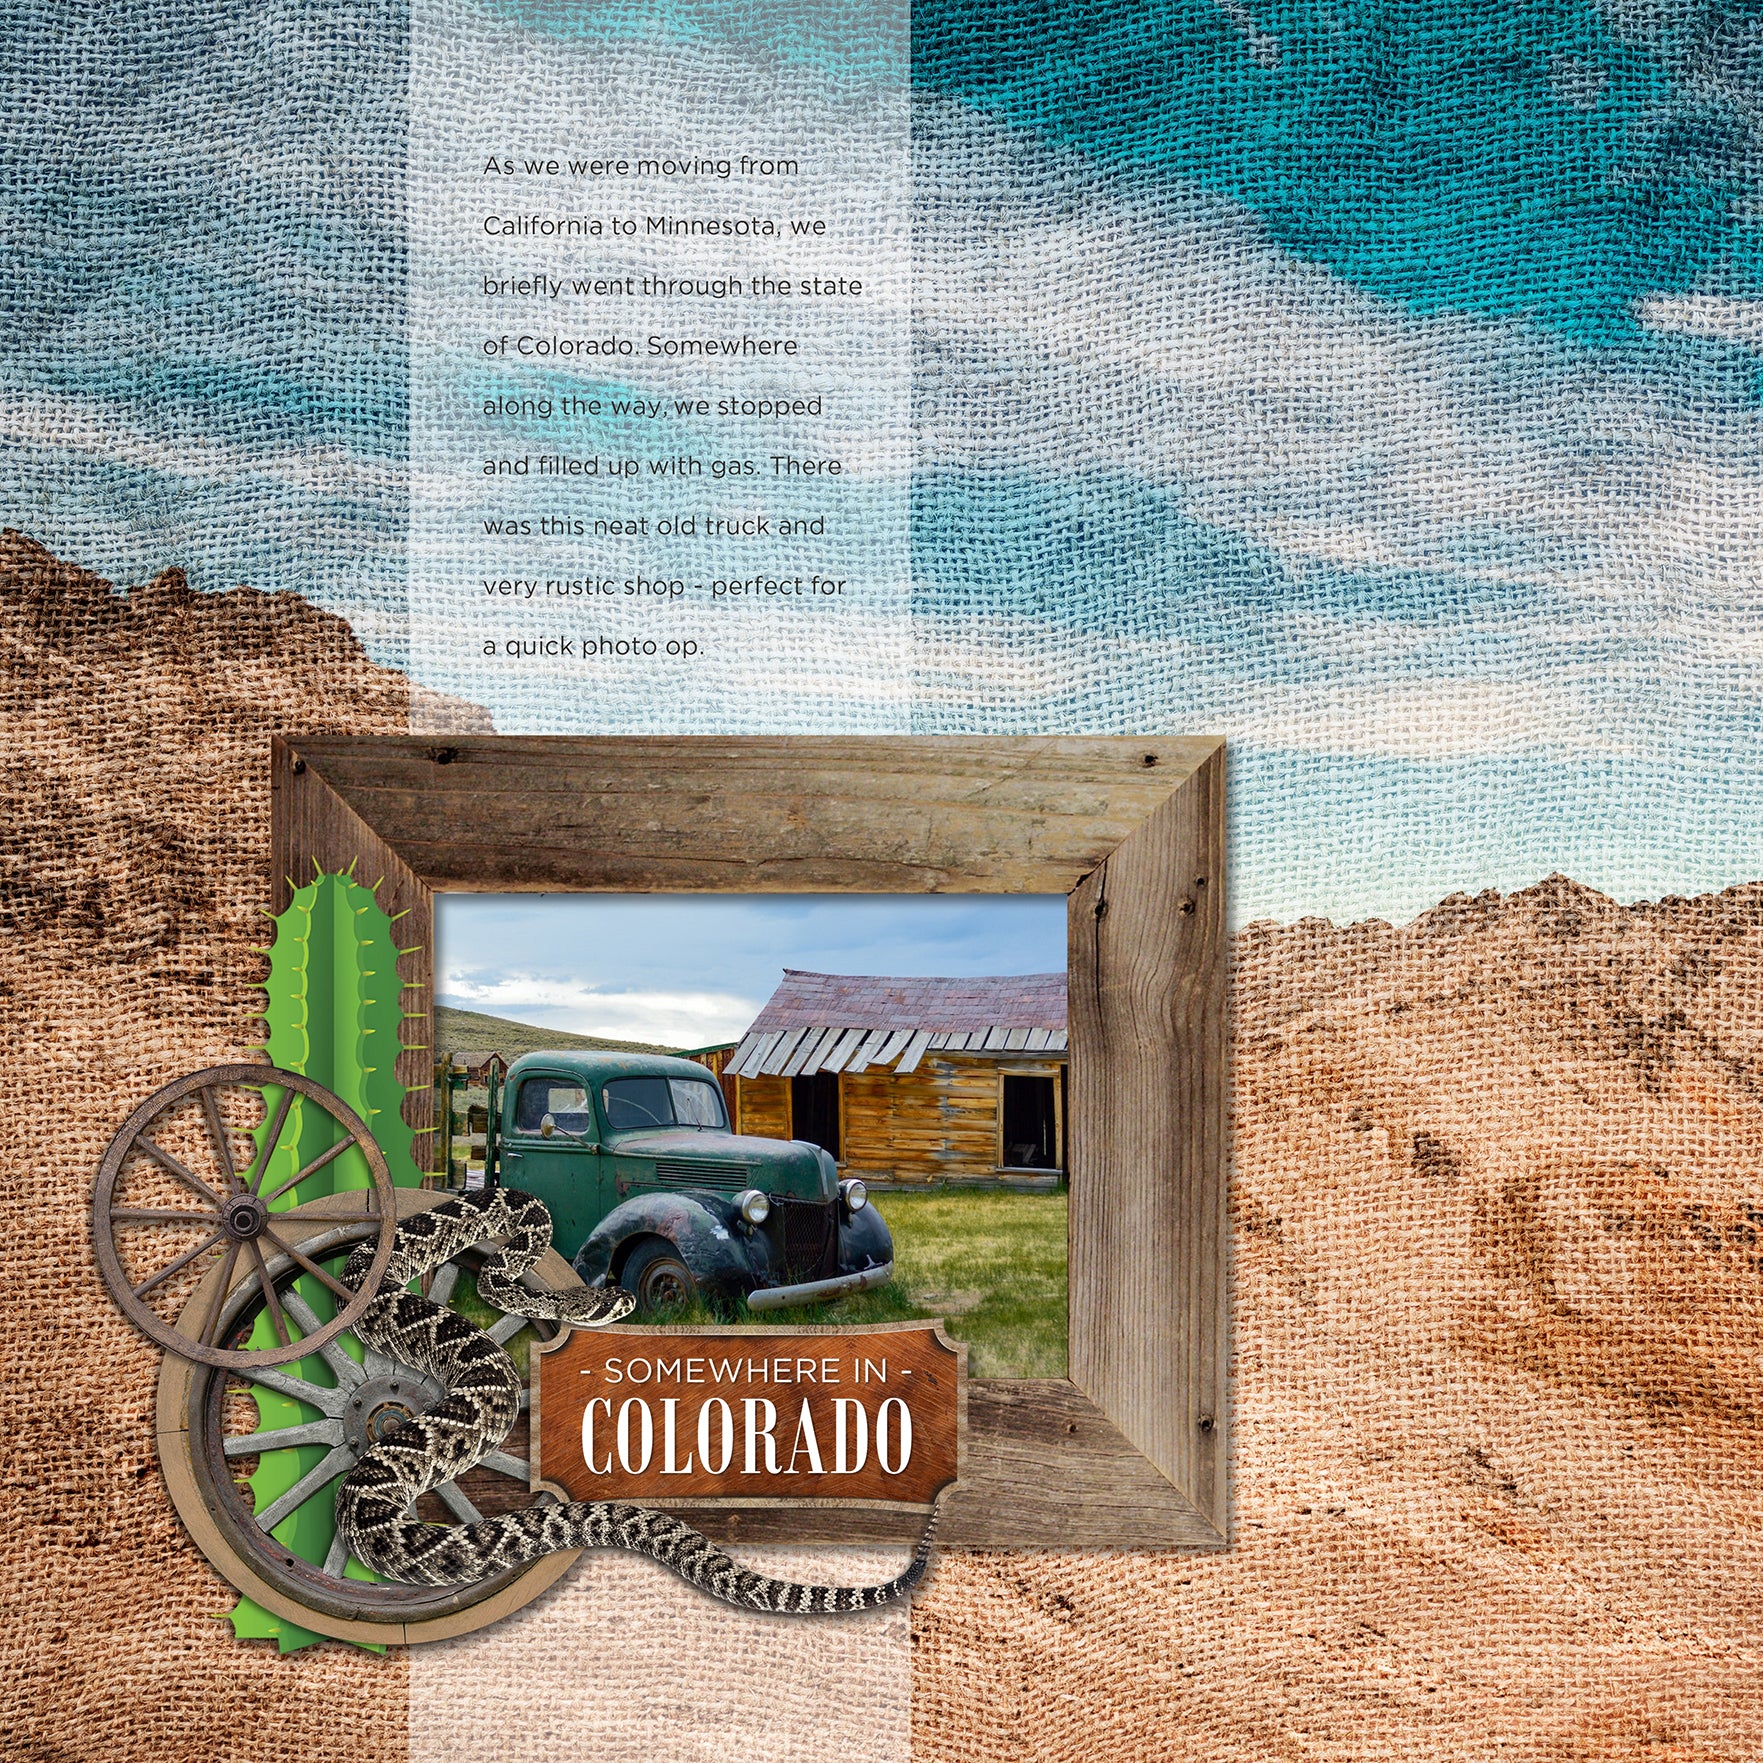 The Wild West Town Clusters Digital Scrapbook Kit features authentic frames with cluster western and desert digital art accents. Easy to use for western-inspired digital scrapbook pages including travels to the Southwest (Arizona, Colorado, Utah, Nevada, New Mexico), cowboy and cowgirl dances and hoedowns, rodeo and ranch events, ghost towns, vacations to the desert, Mexico, and so much more!